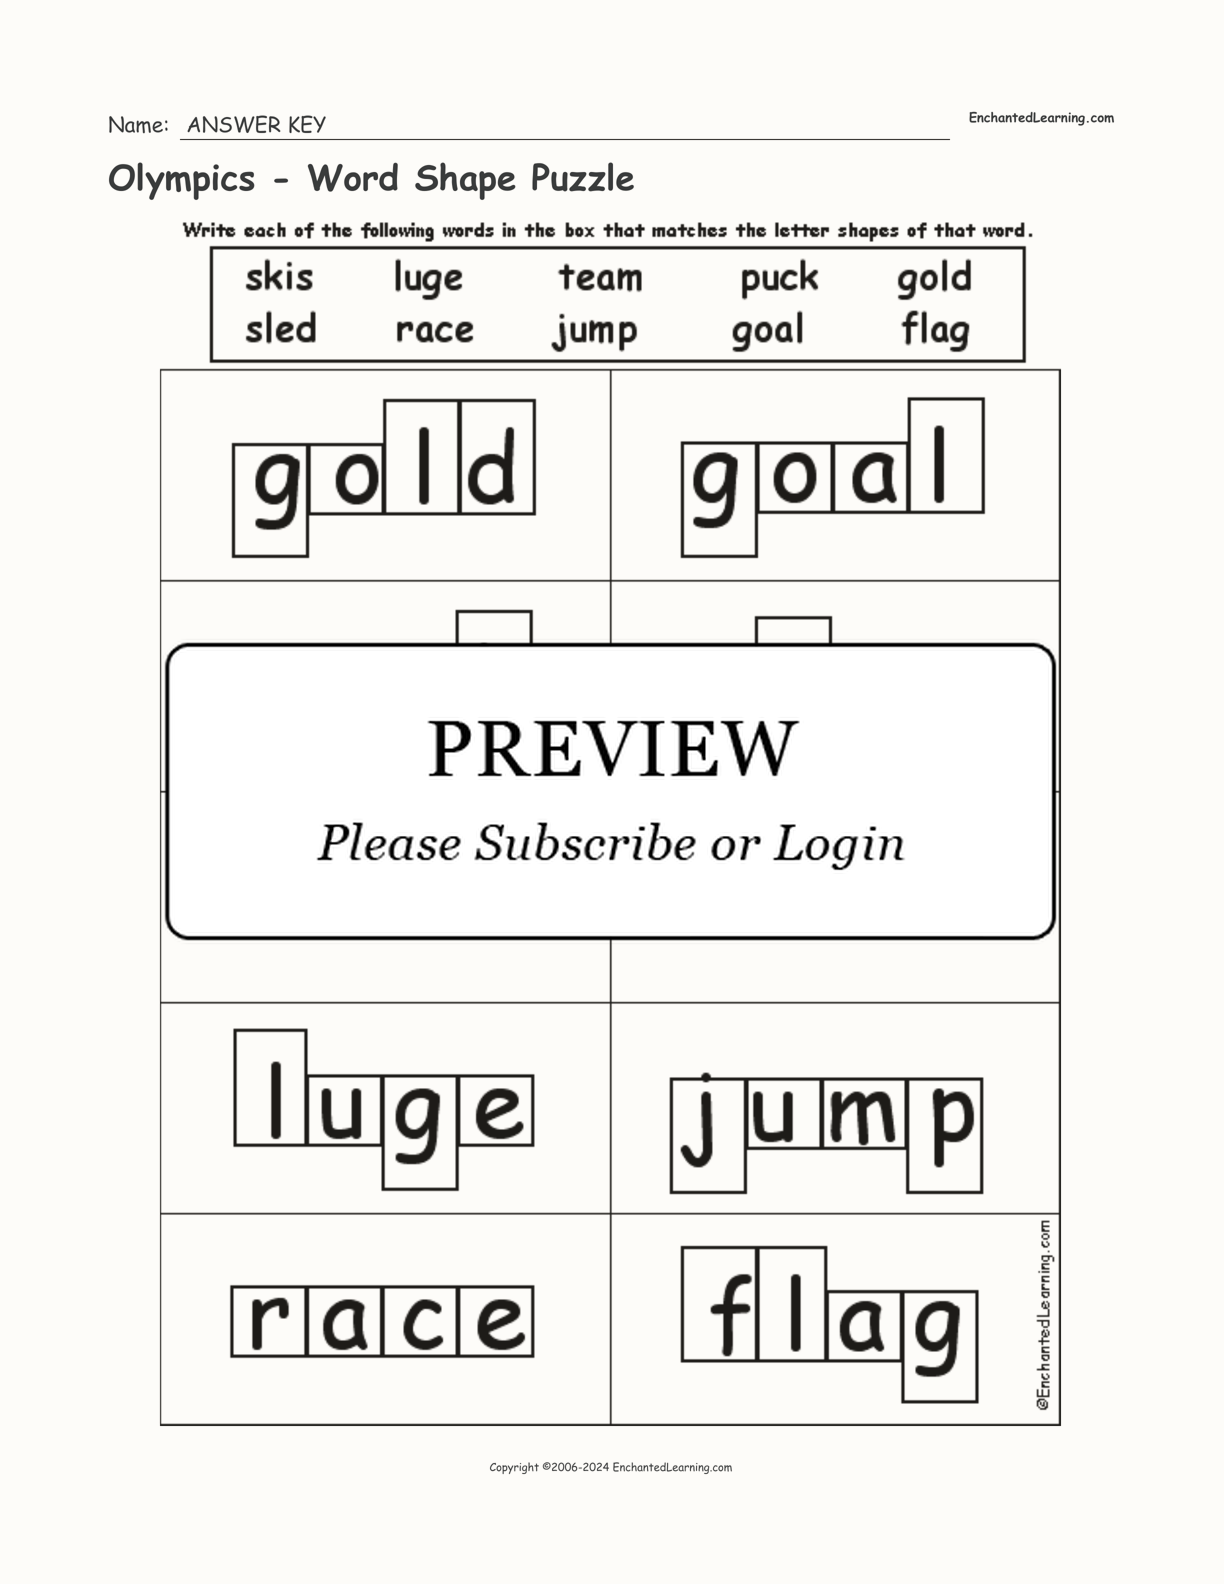 Olympics - Word Shape Puzzle interactive worksheet page 2